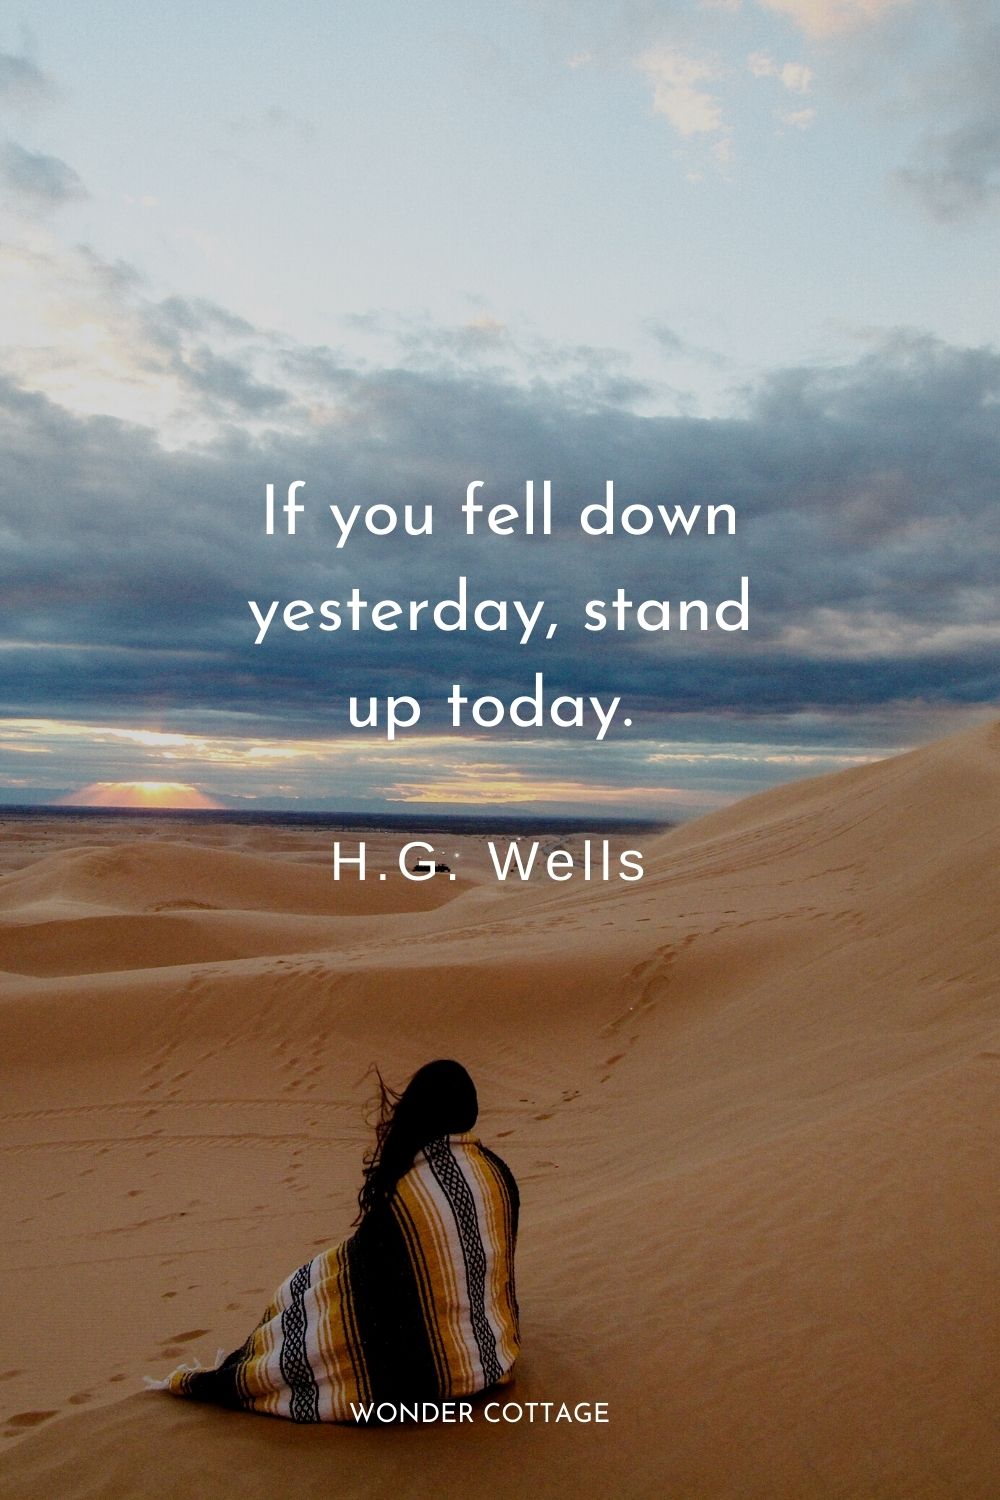 If you fell down yesterday, stand up today.  H.G. Wells